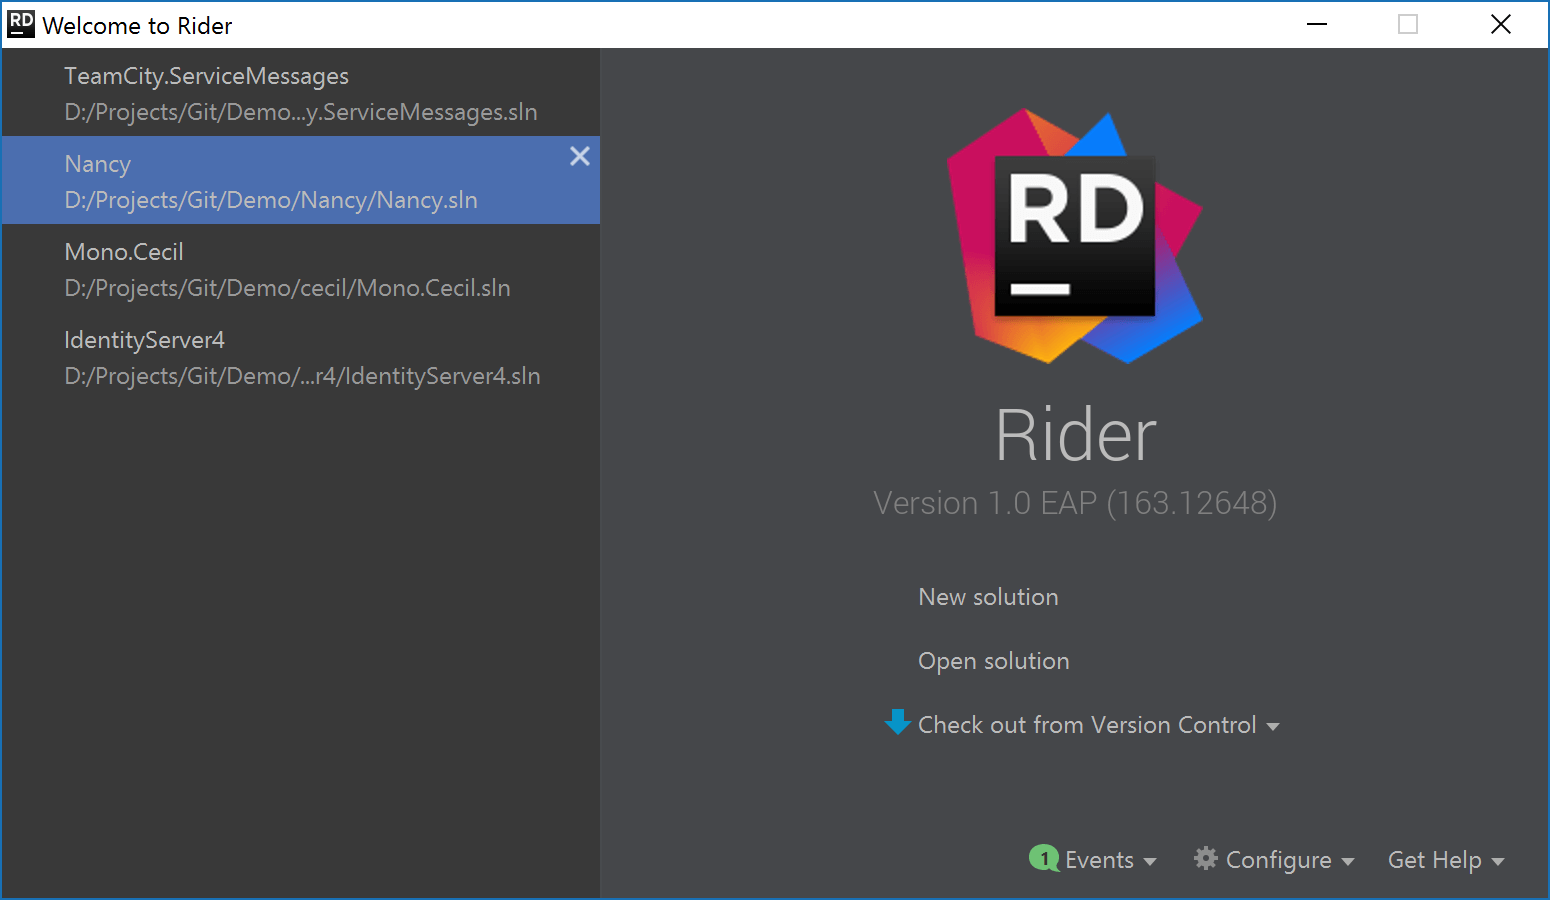 Rider welcome screen allows opening solution or import from version control